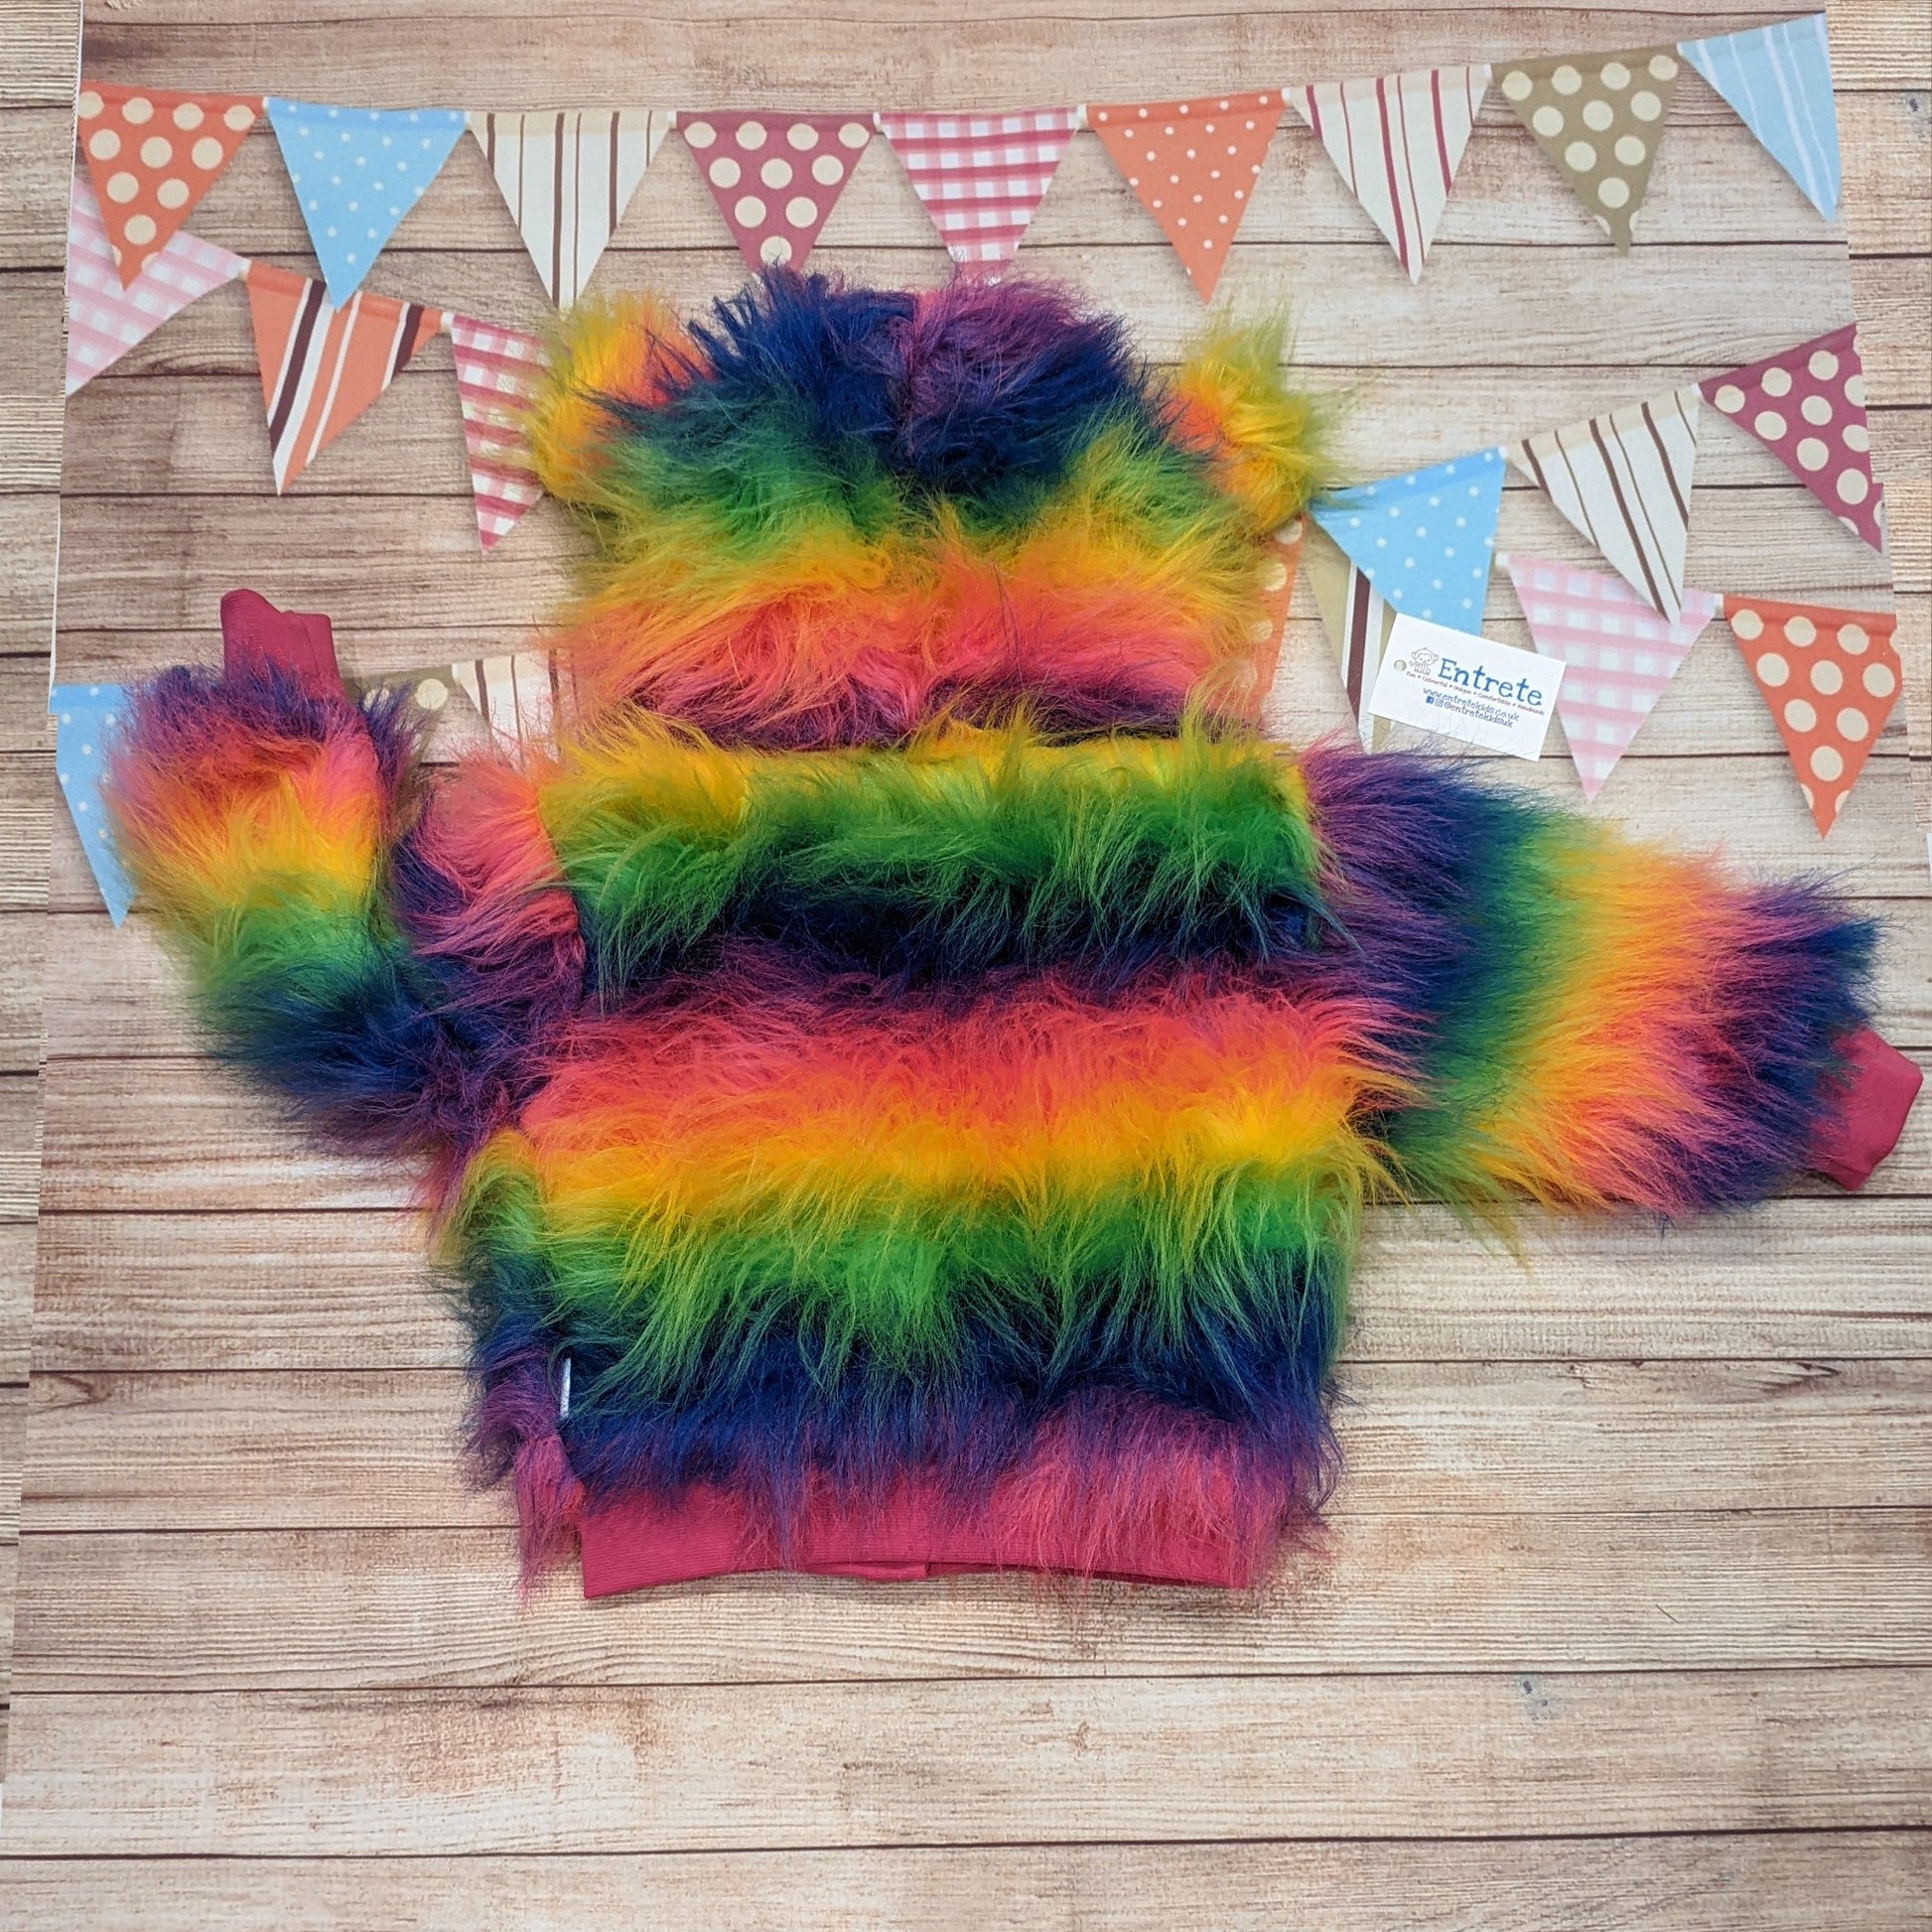 The colourful rainbow bear reversible hoodie. Handmade from rainbow long hair faux fur and fuchsia cotton ribbing, with royal blue cotton jersey on the reverse. Shown from the rear.